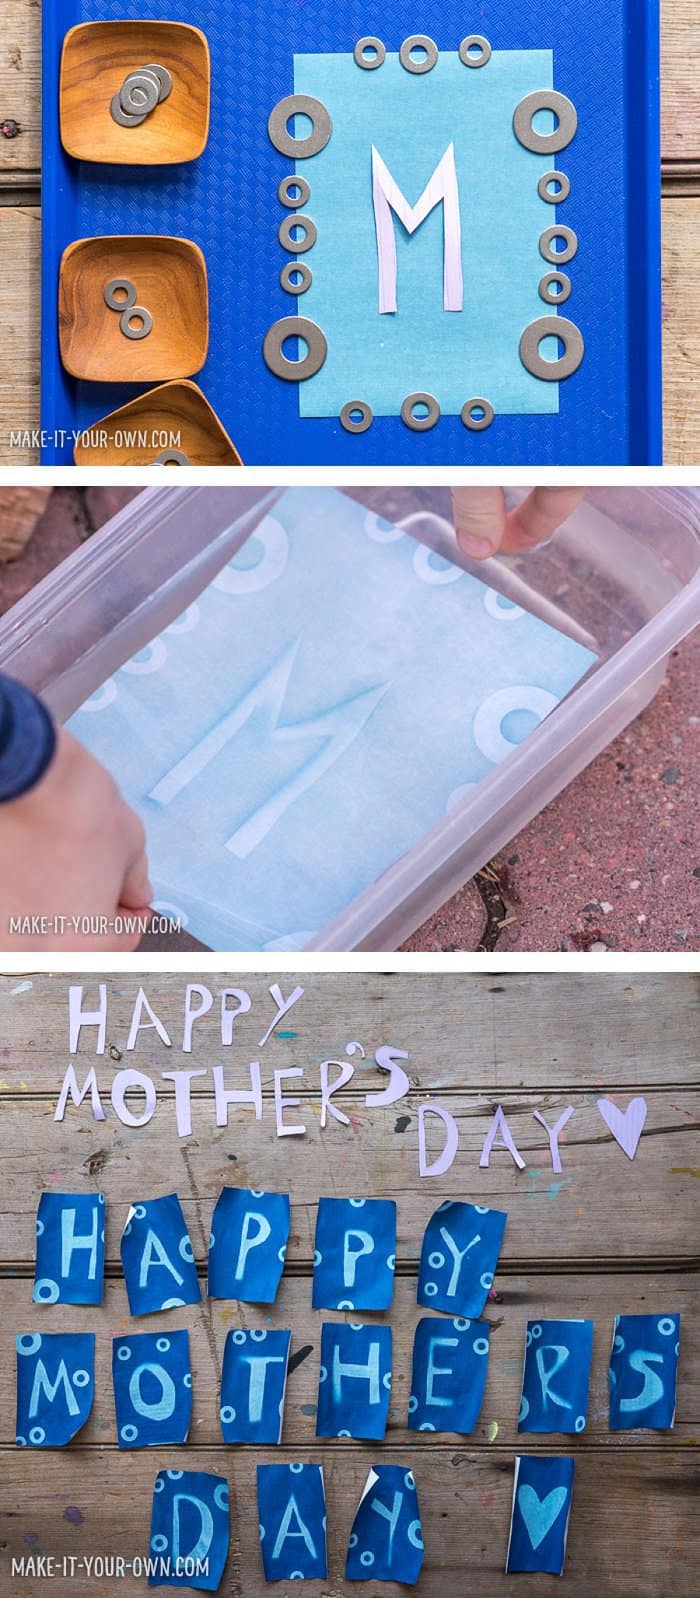 Solar Print Art for Children: Make a Handmade Mother’s Day Garland *This educational DIY kids' craft is so sweet. Love the final product. The colors are lovely!